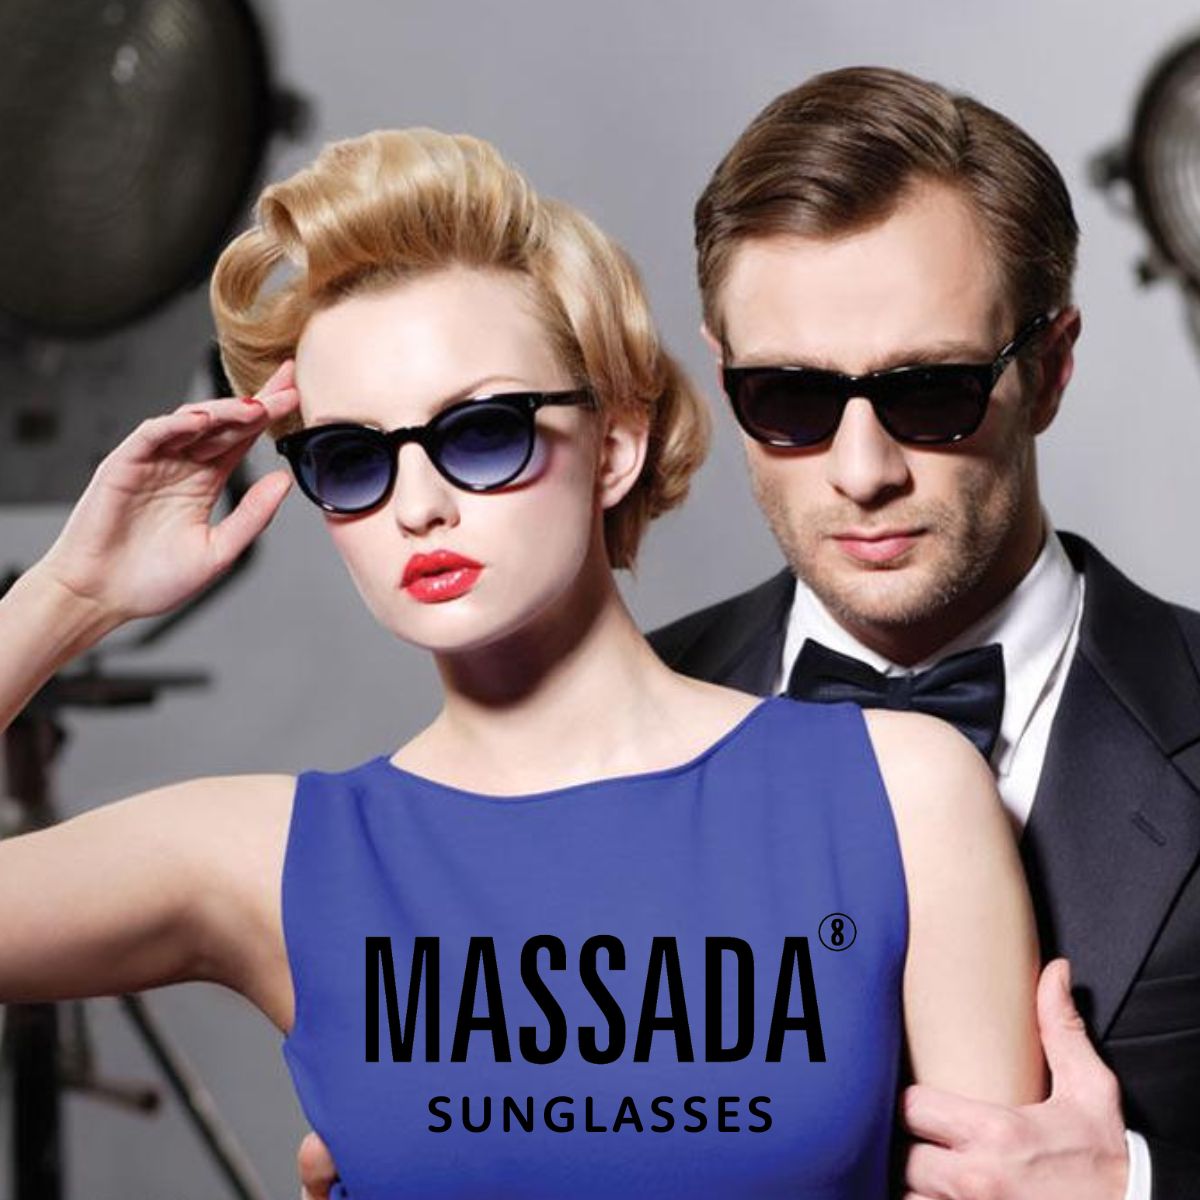 "Explore trendy Massada sunglasses for men and women at Optorium. Shop stylish shades, cool goggles, and fashionable sunglasses for ultimate eye protection and fashion upgrade."